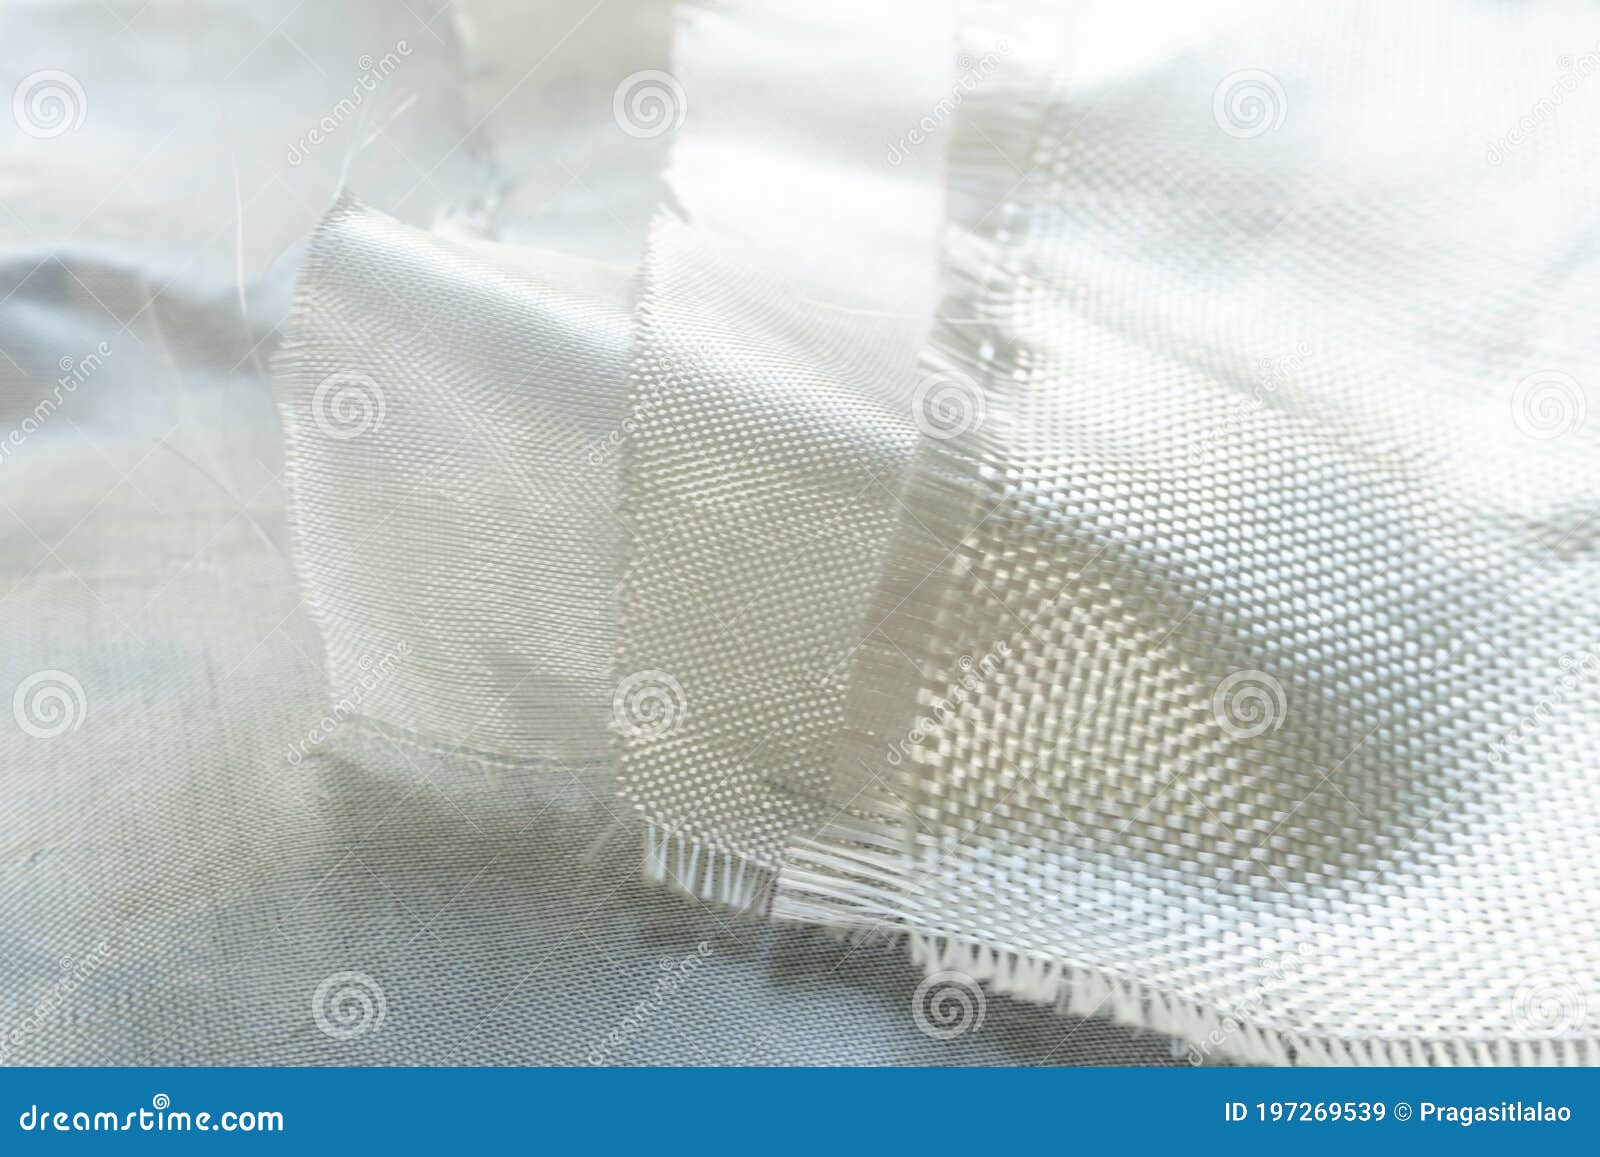 White Glass Fiber Composite Raw Material Background Stock Image - Image ...